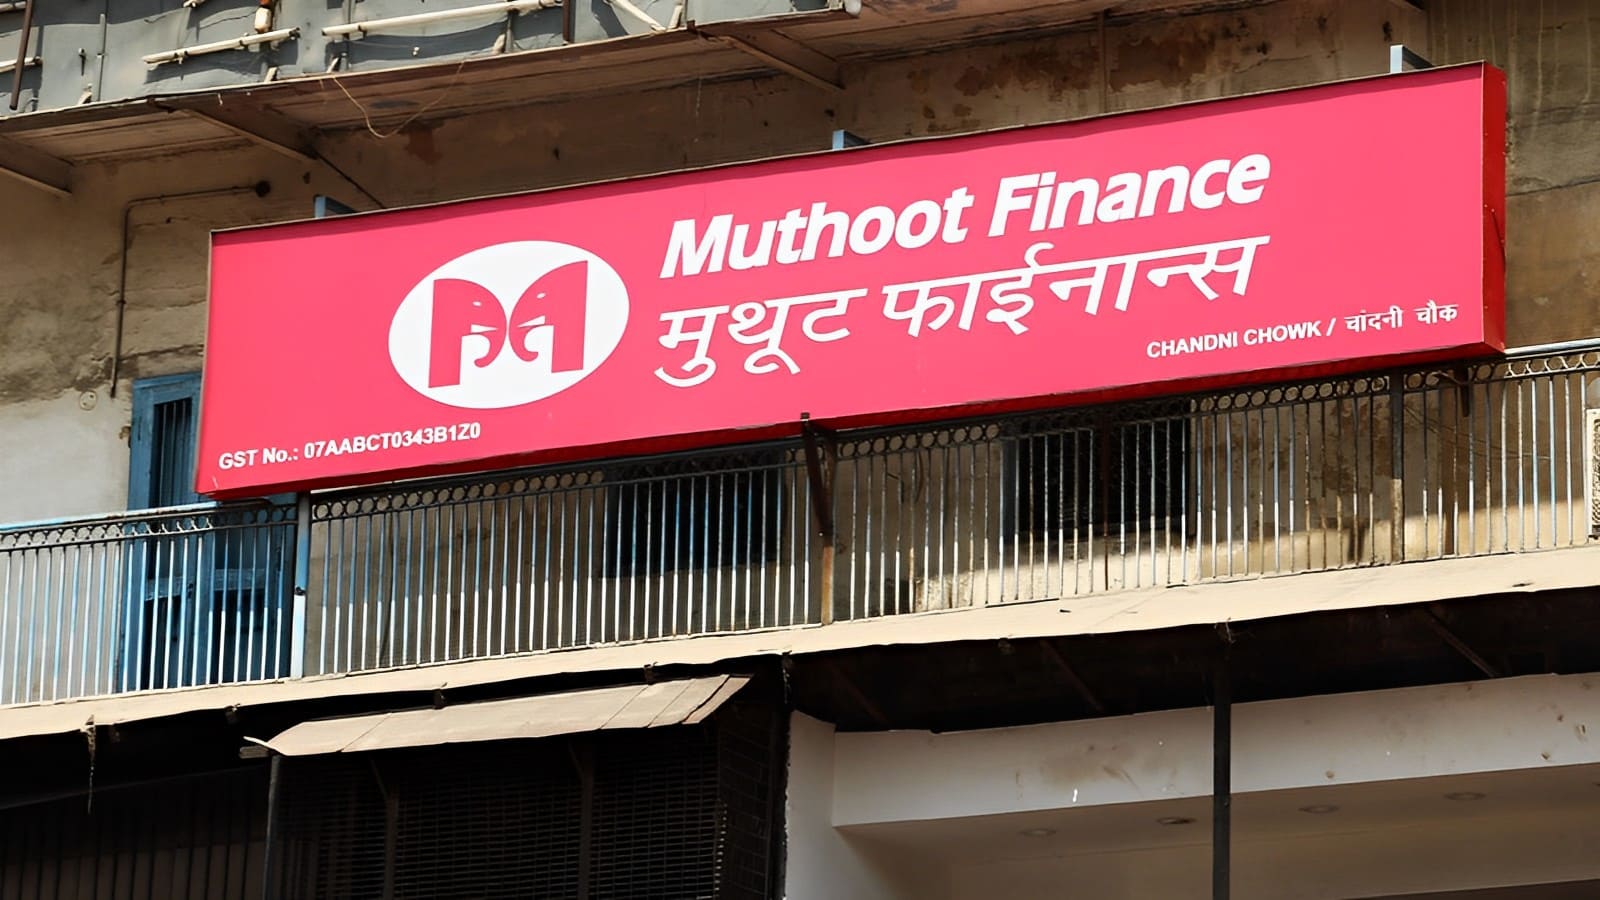 Muthoot Finance to raise ₹700 Cr through NCD issuance